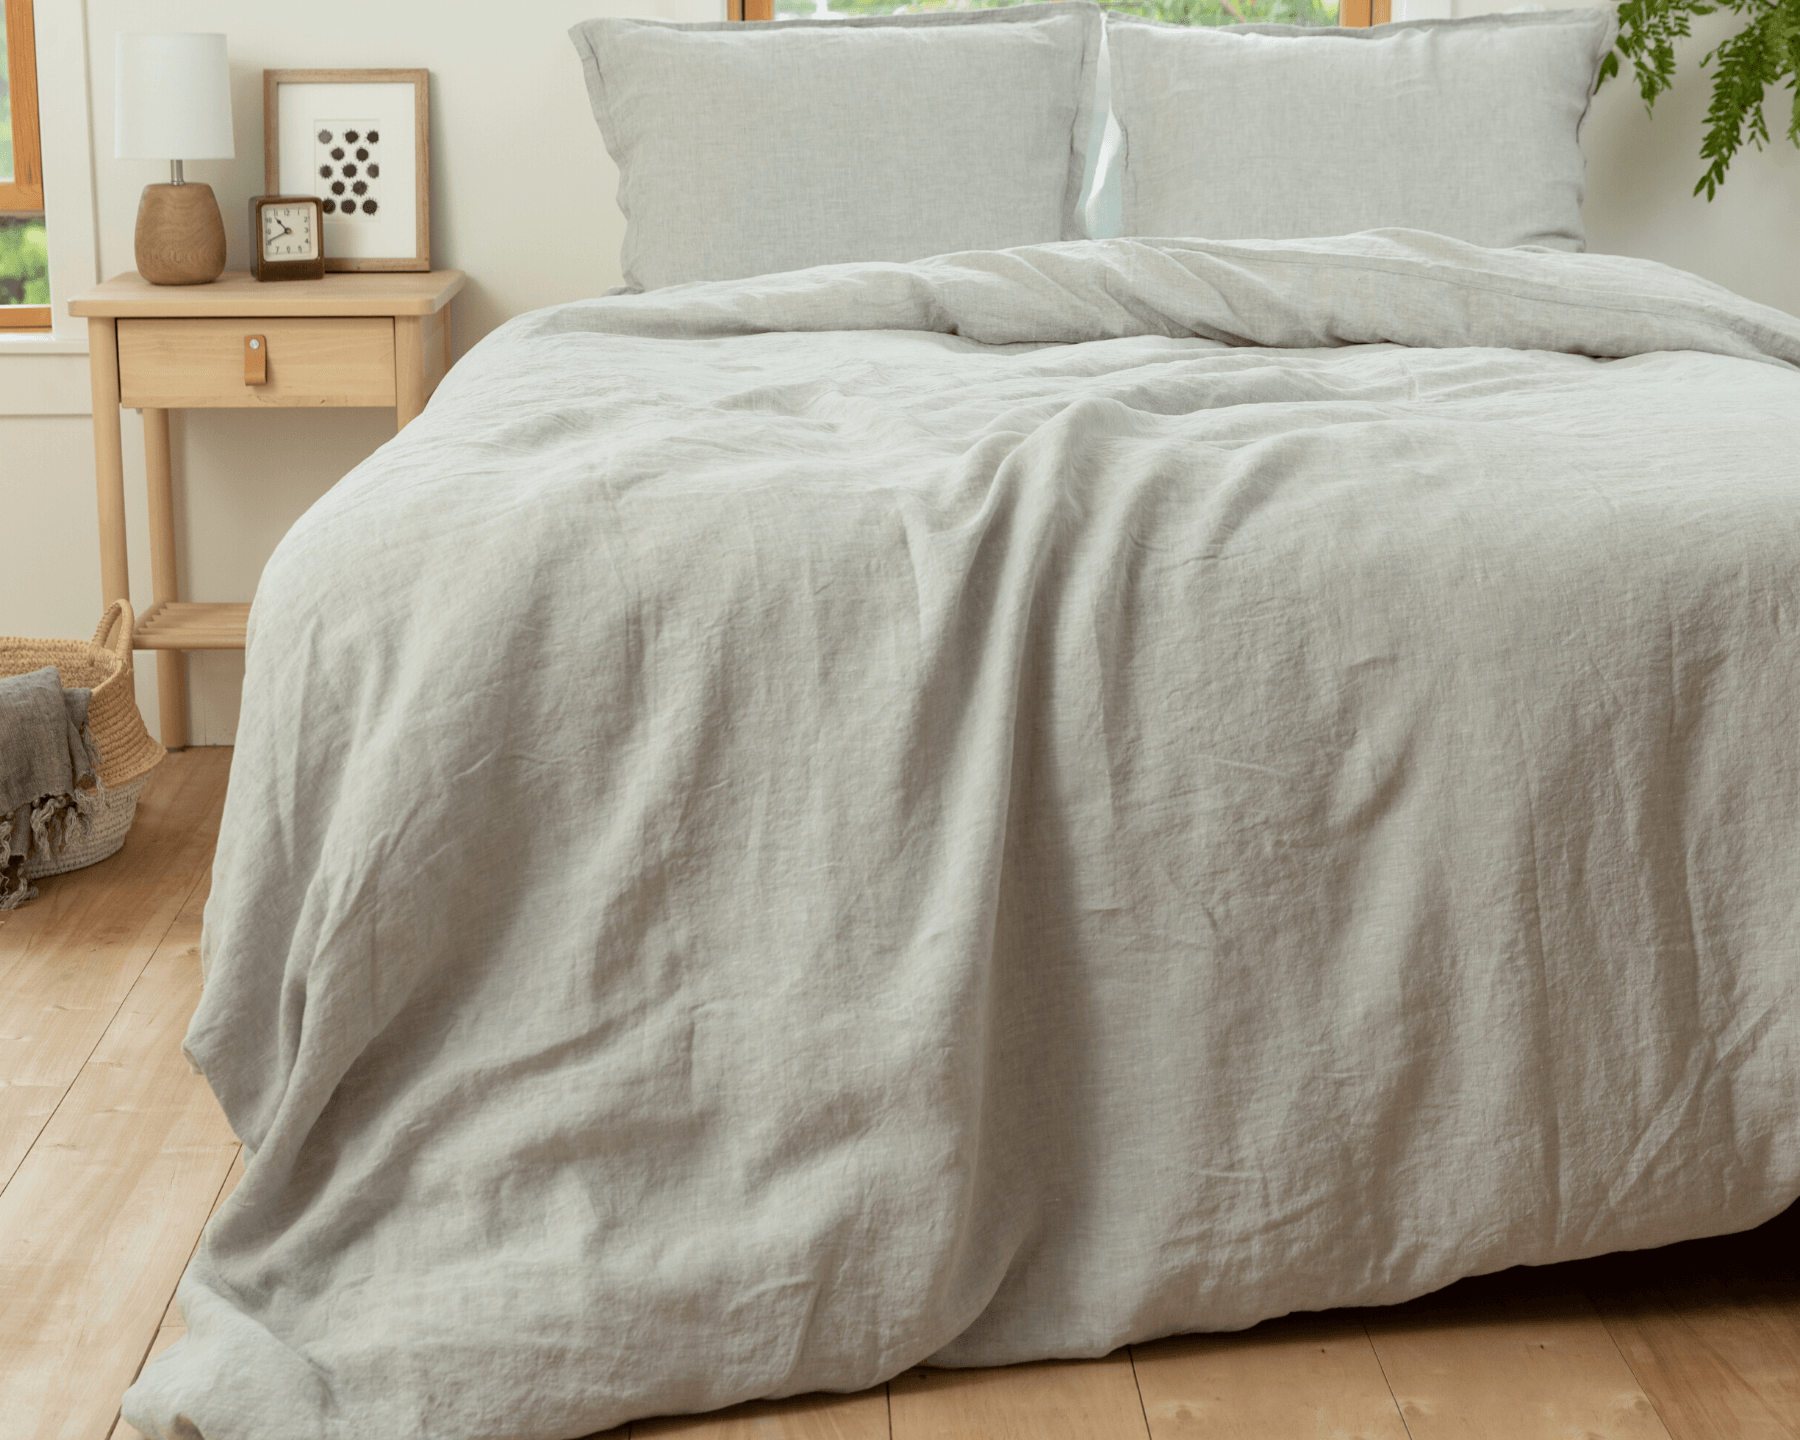 Chambray grey organic European linen duvet cover set with two matching pillowcases